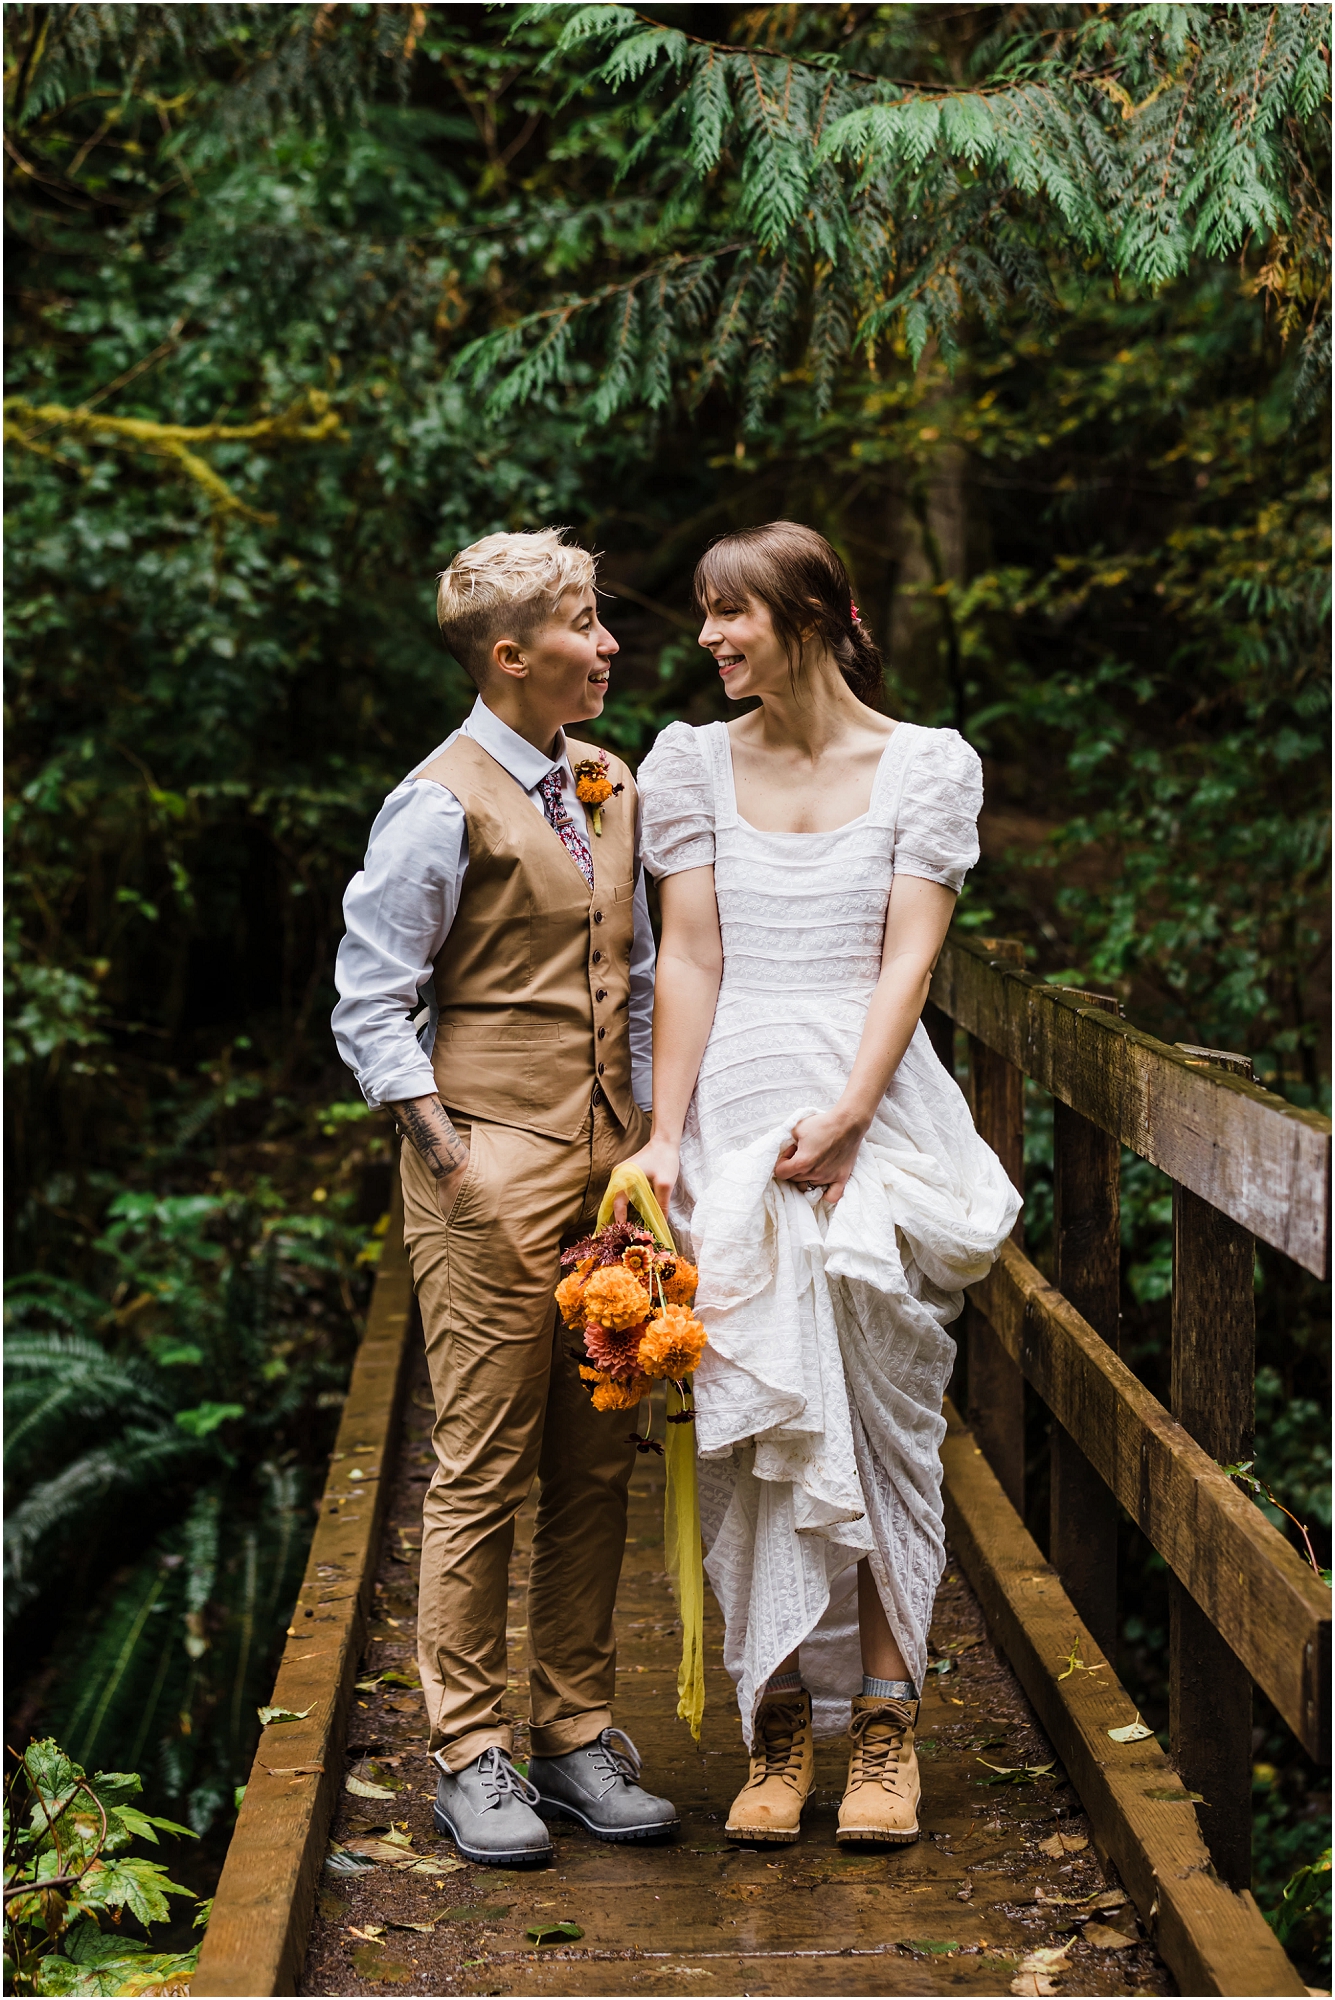 A wooden bridge crossing a creek with a puddle creates the perfect reflection of this couple in their wedding clothes for their Oregon adventure elopement. | Erica Swantek Photography